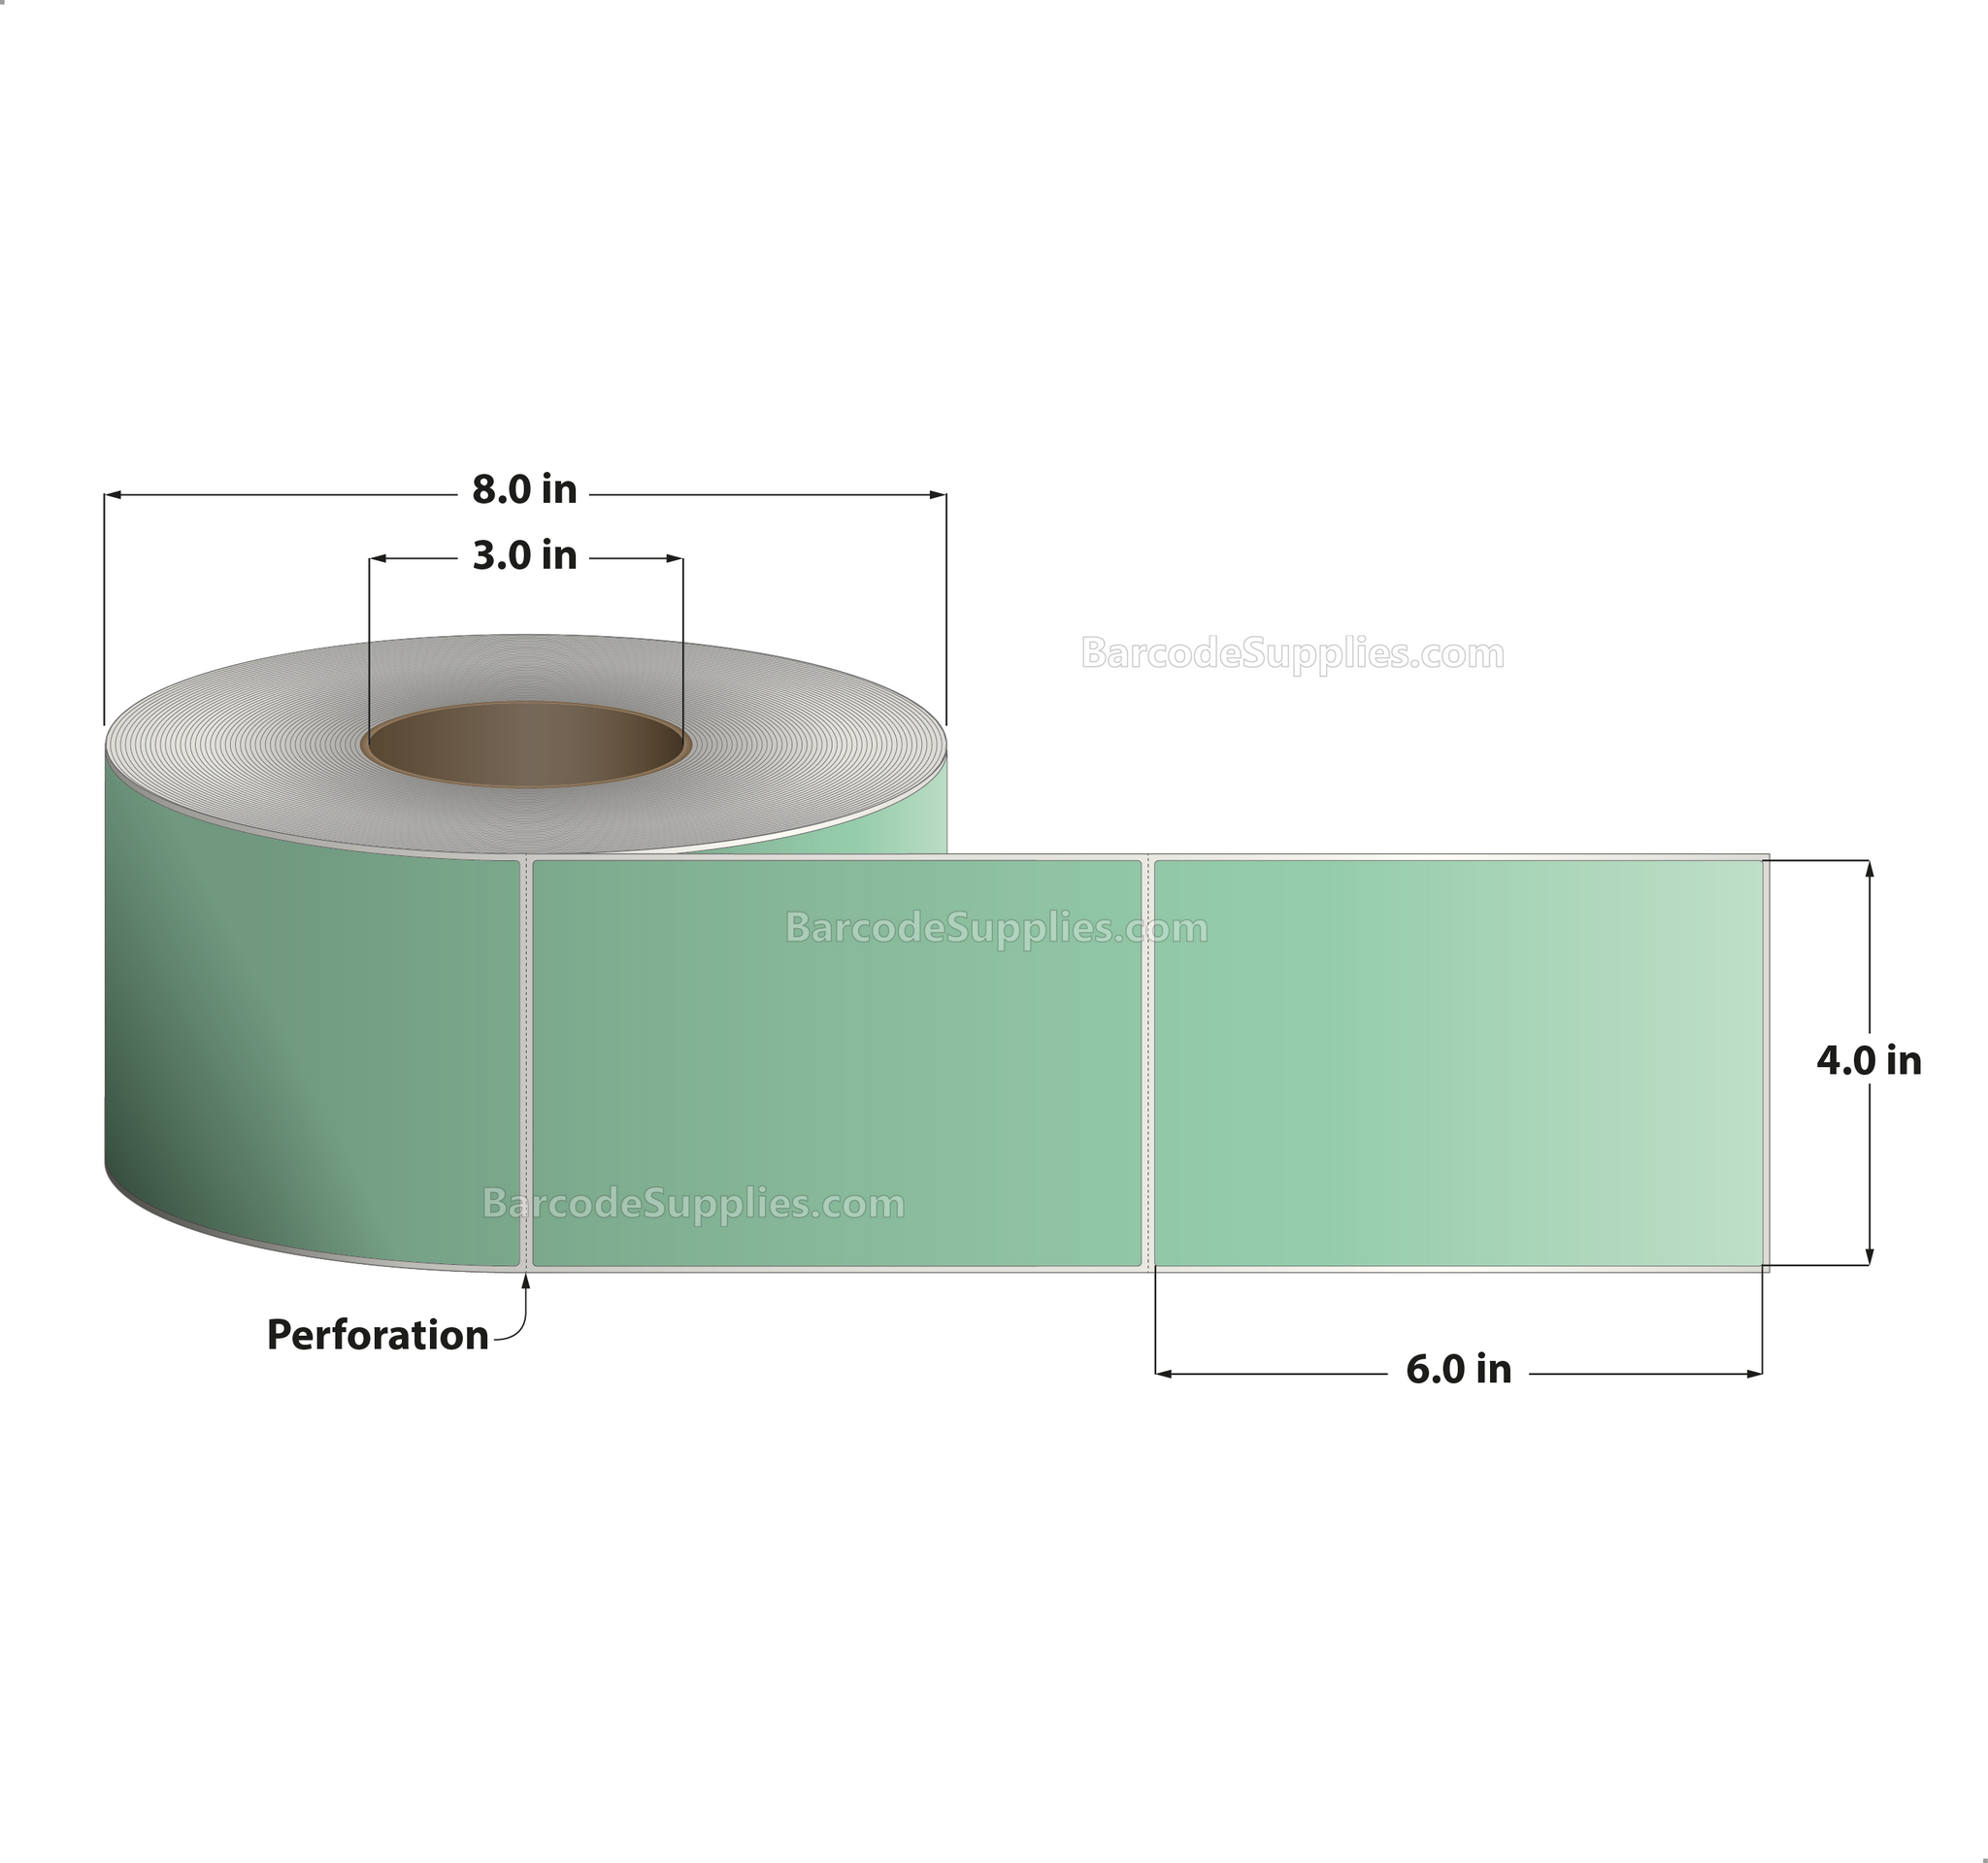 4 x 6 Direct Thermal Green Labels With Acrylic Adhesive - Perforated - 1000 Labels Per Roll - Carton Of 4 Rolls - 4000 Labels Total - MPN: RD-4-6-1000-GR